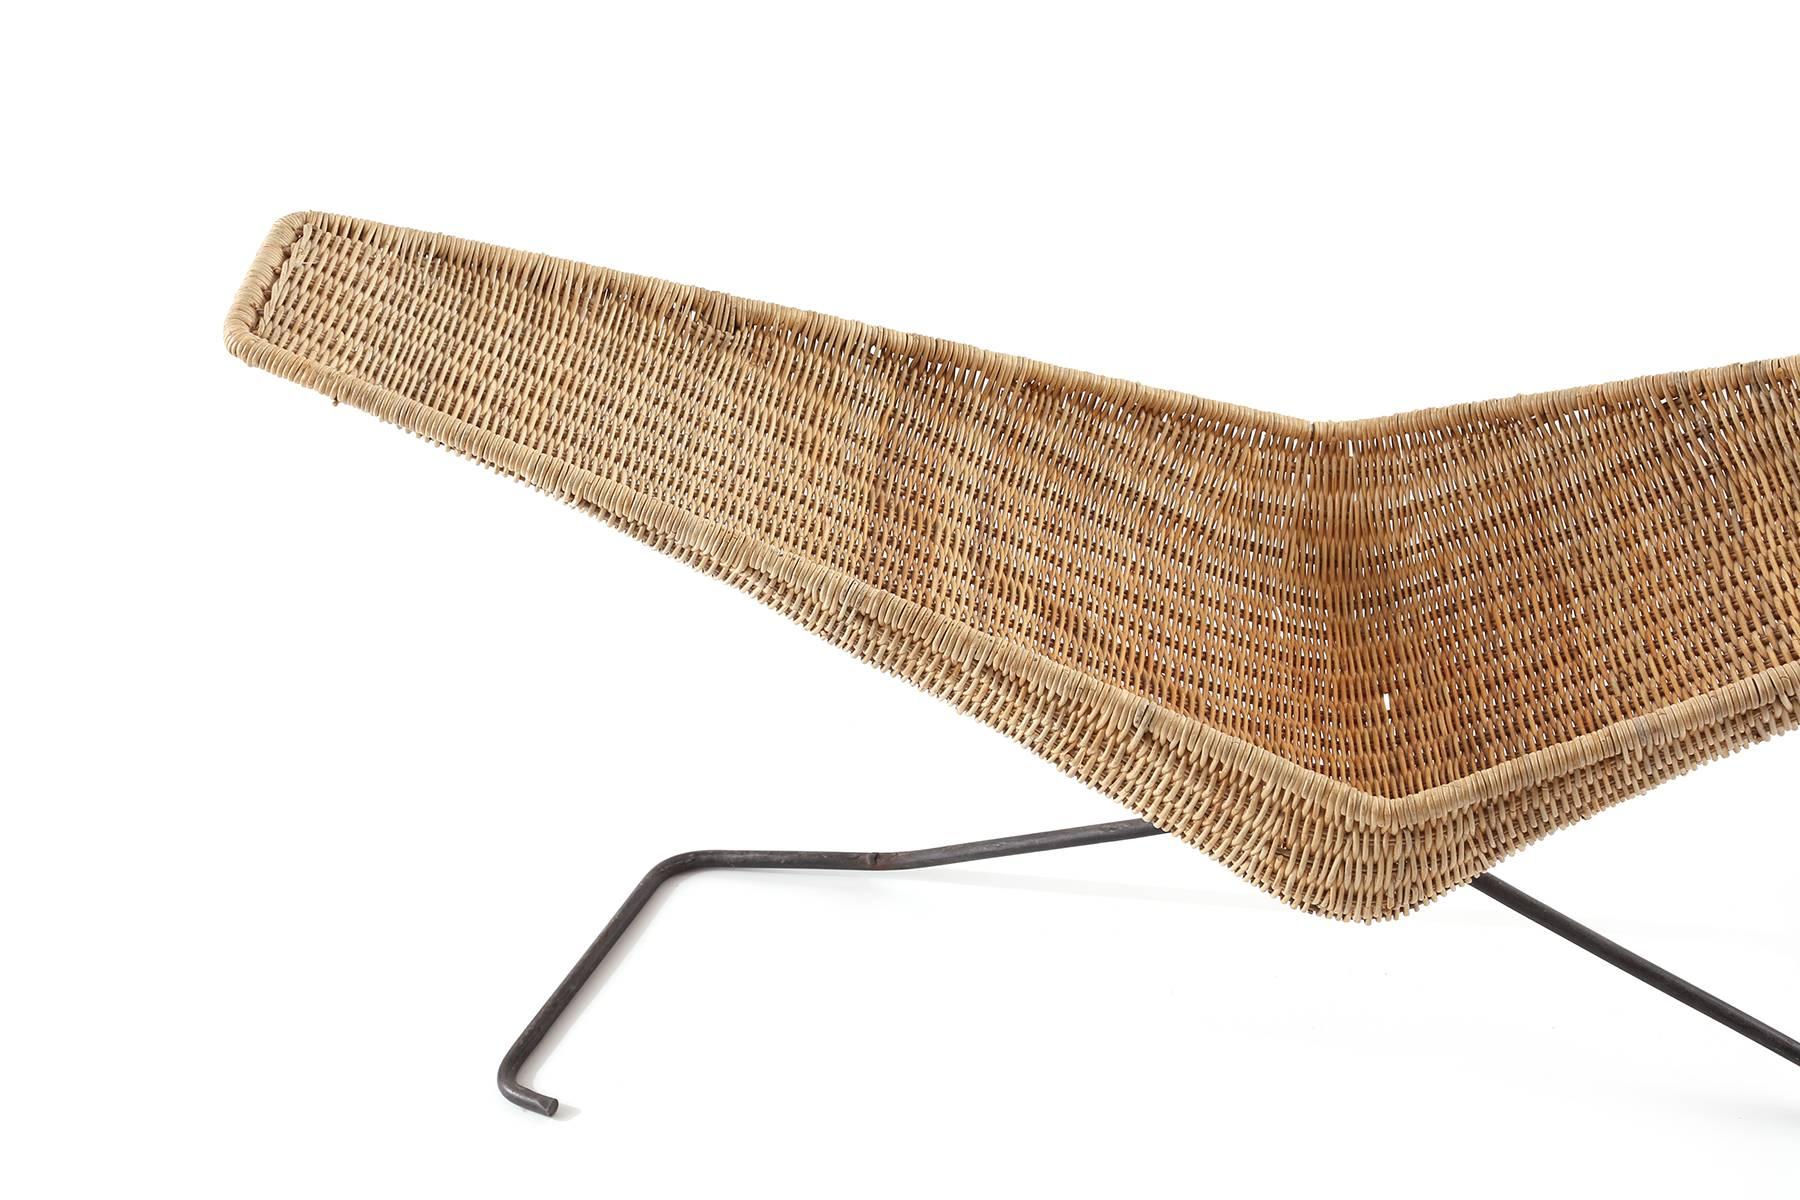 Fabulous wicker and iron magazine holder or catch all from Italy, circa late 1950s. This all original example has a V-shaped wicker top perfect for storage of books or magazines that sits atop a patinated iron base.